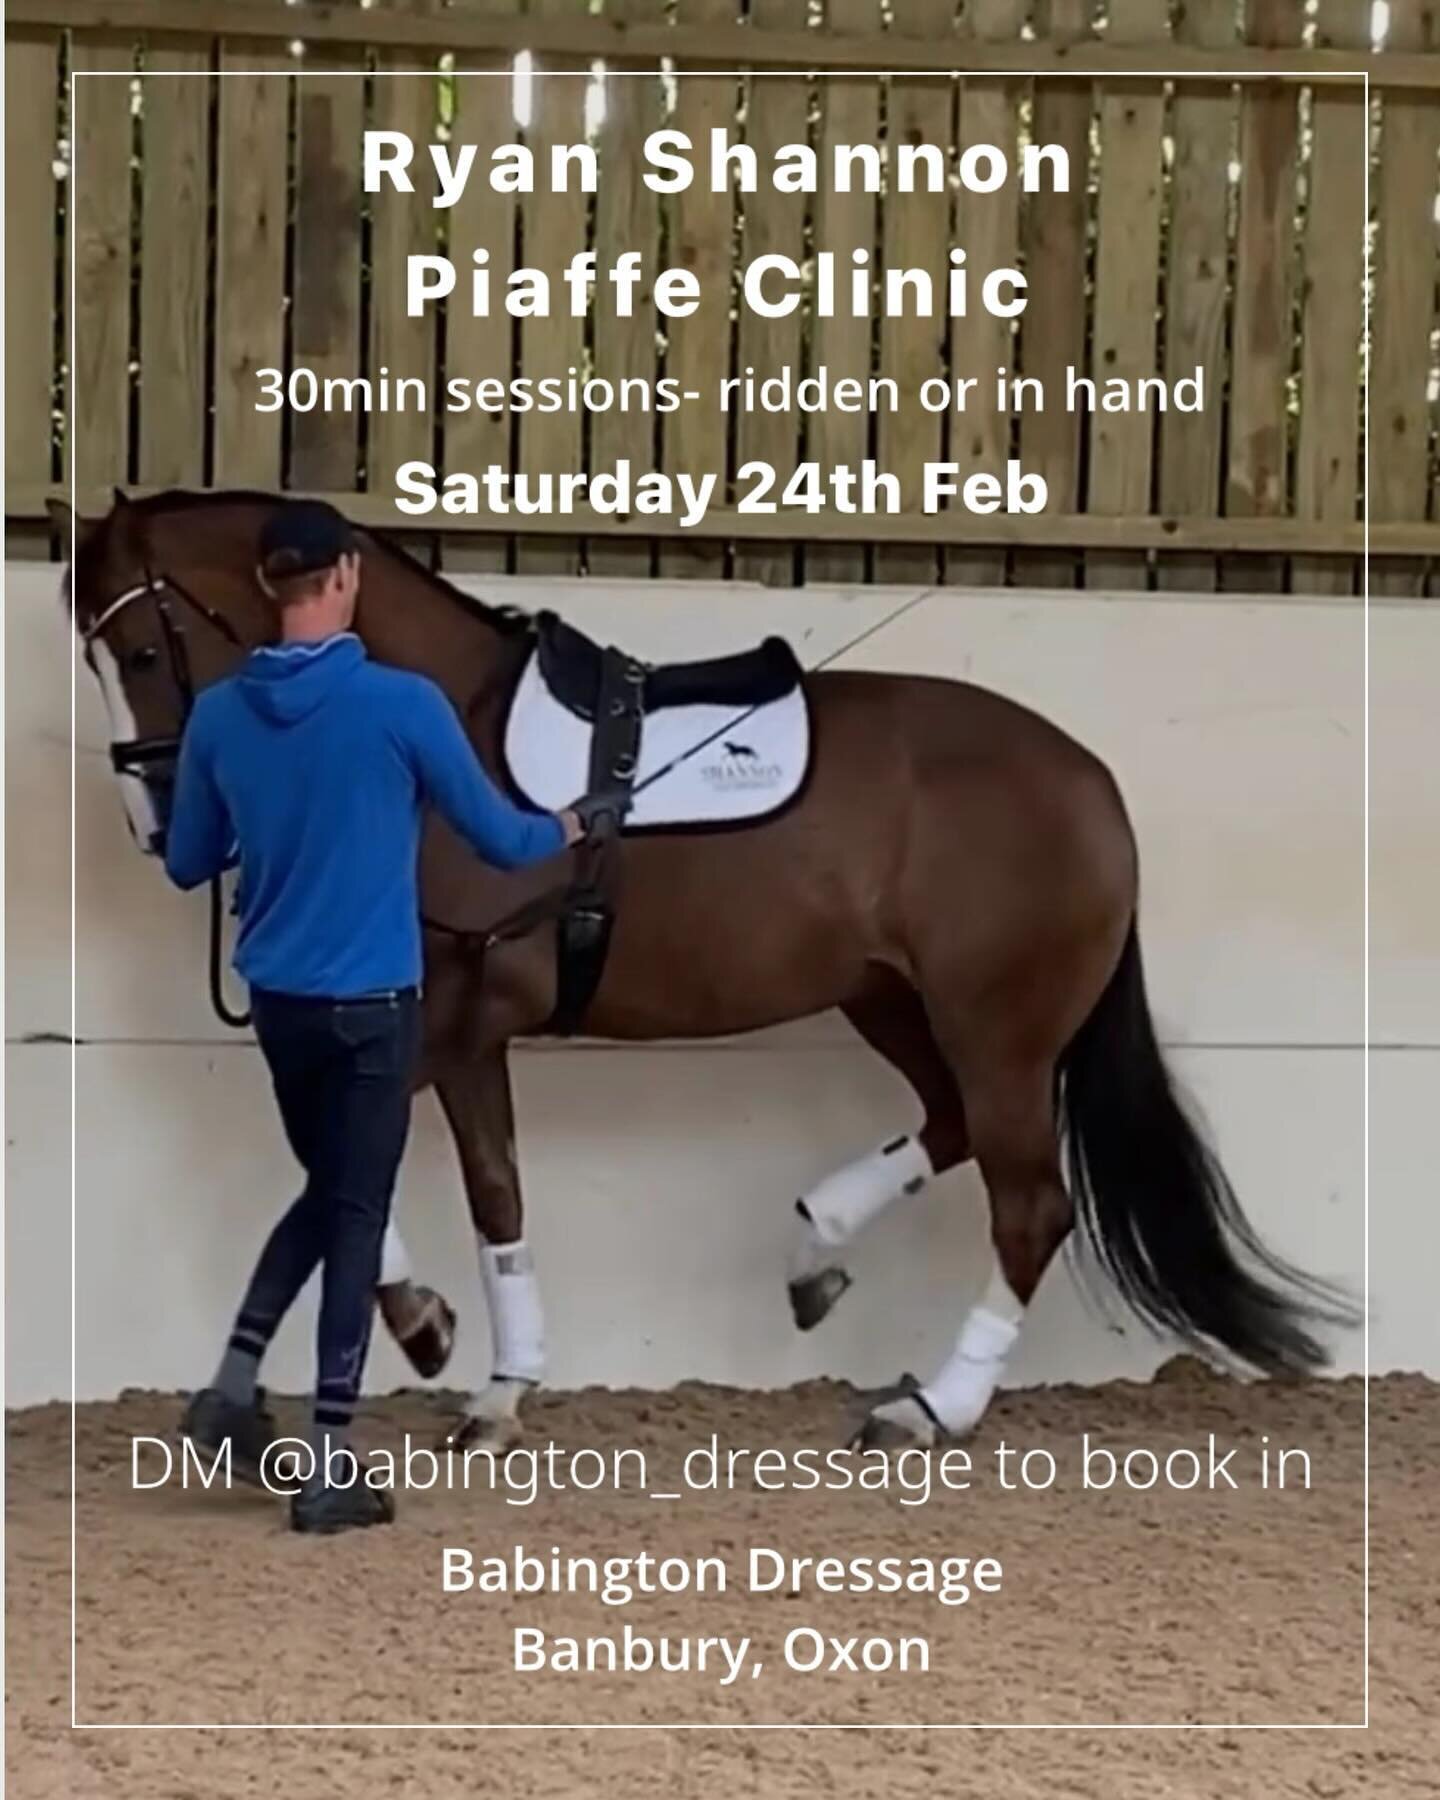 📣FULLY BOOKED 📣

Ryan Shannon Piaffe Clinic - Saturday 24th February 2024

30min sessions, these can be done in-hand or ridden.

Location: Babington Dressage, Williamscot, Oxfordshire 

Please DM @babington_dressage for more information or to book 